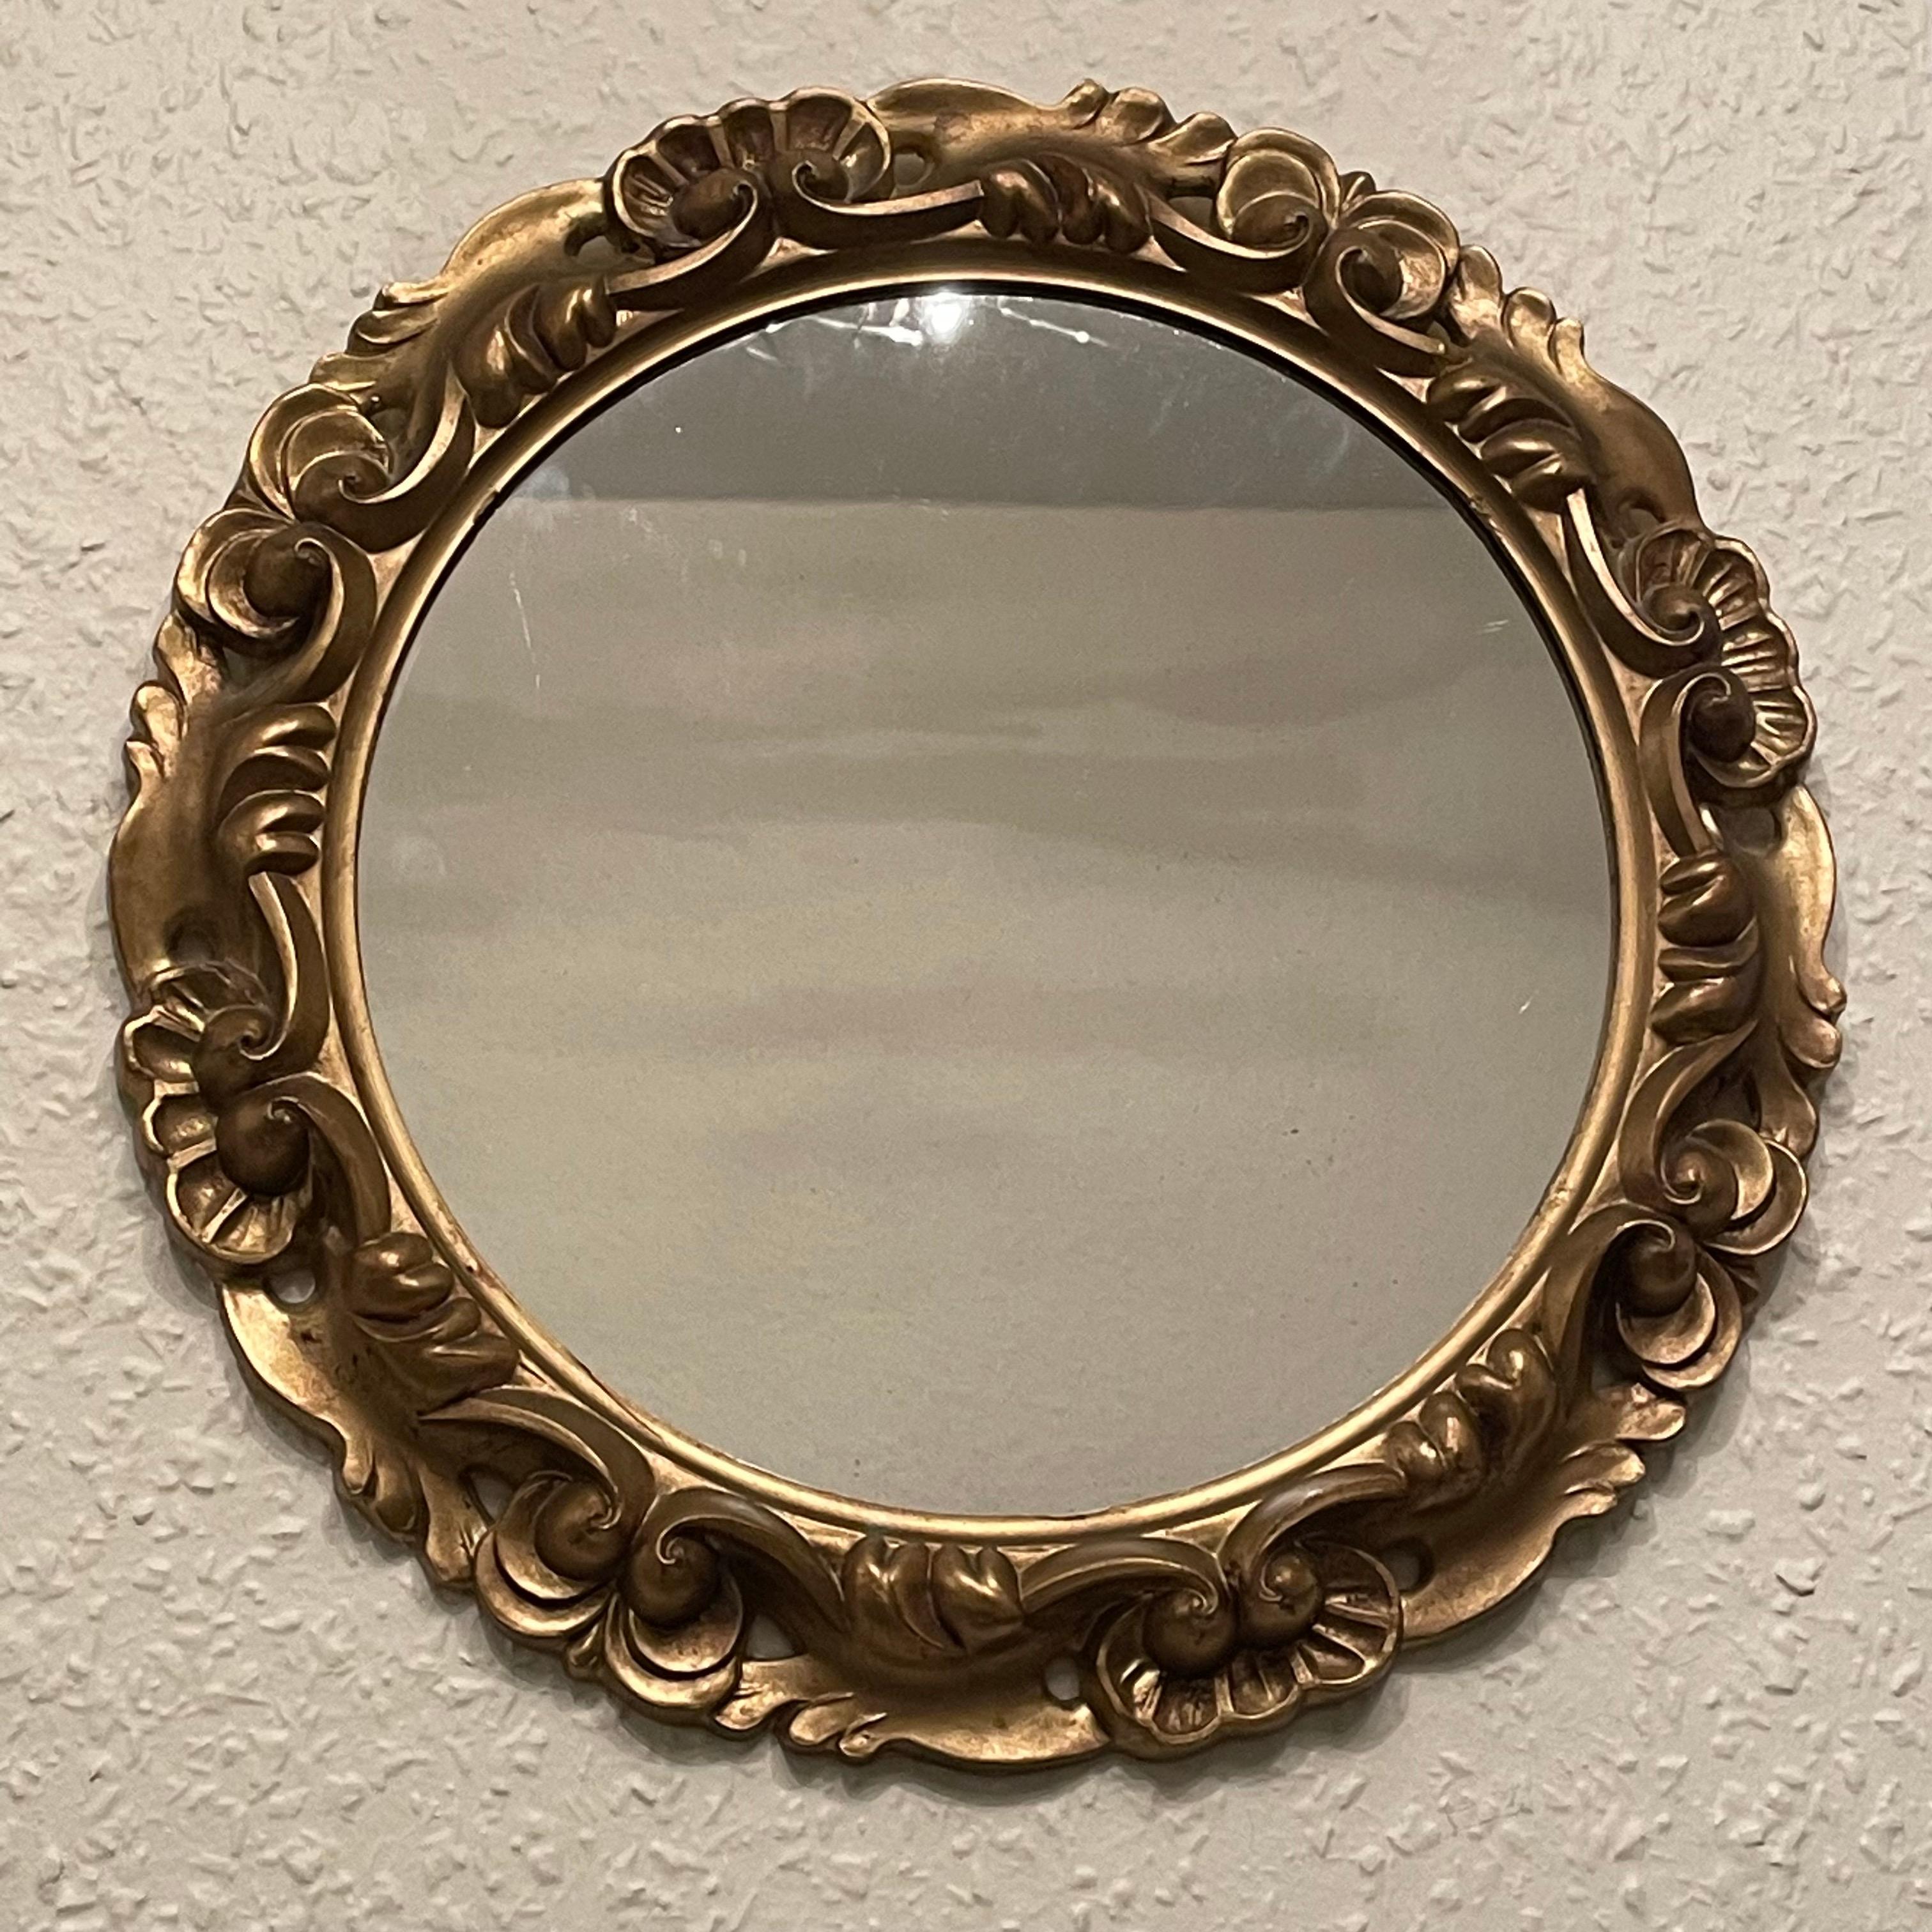 Hollywood Regency Italian Tole Toleware Chic Gilt Resin Mirror, circa 1980s For Sale